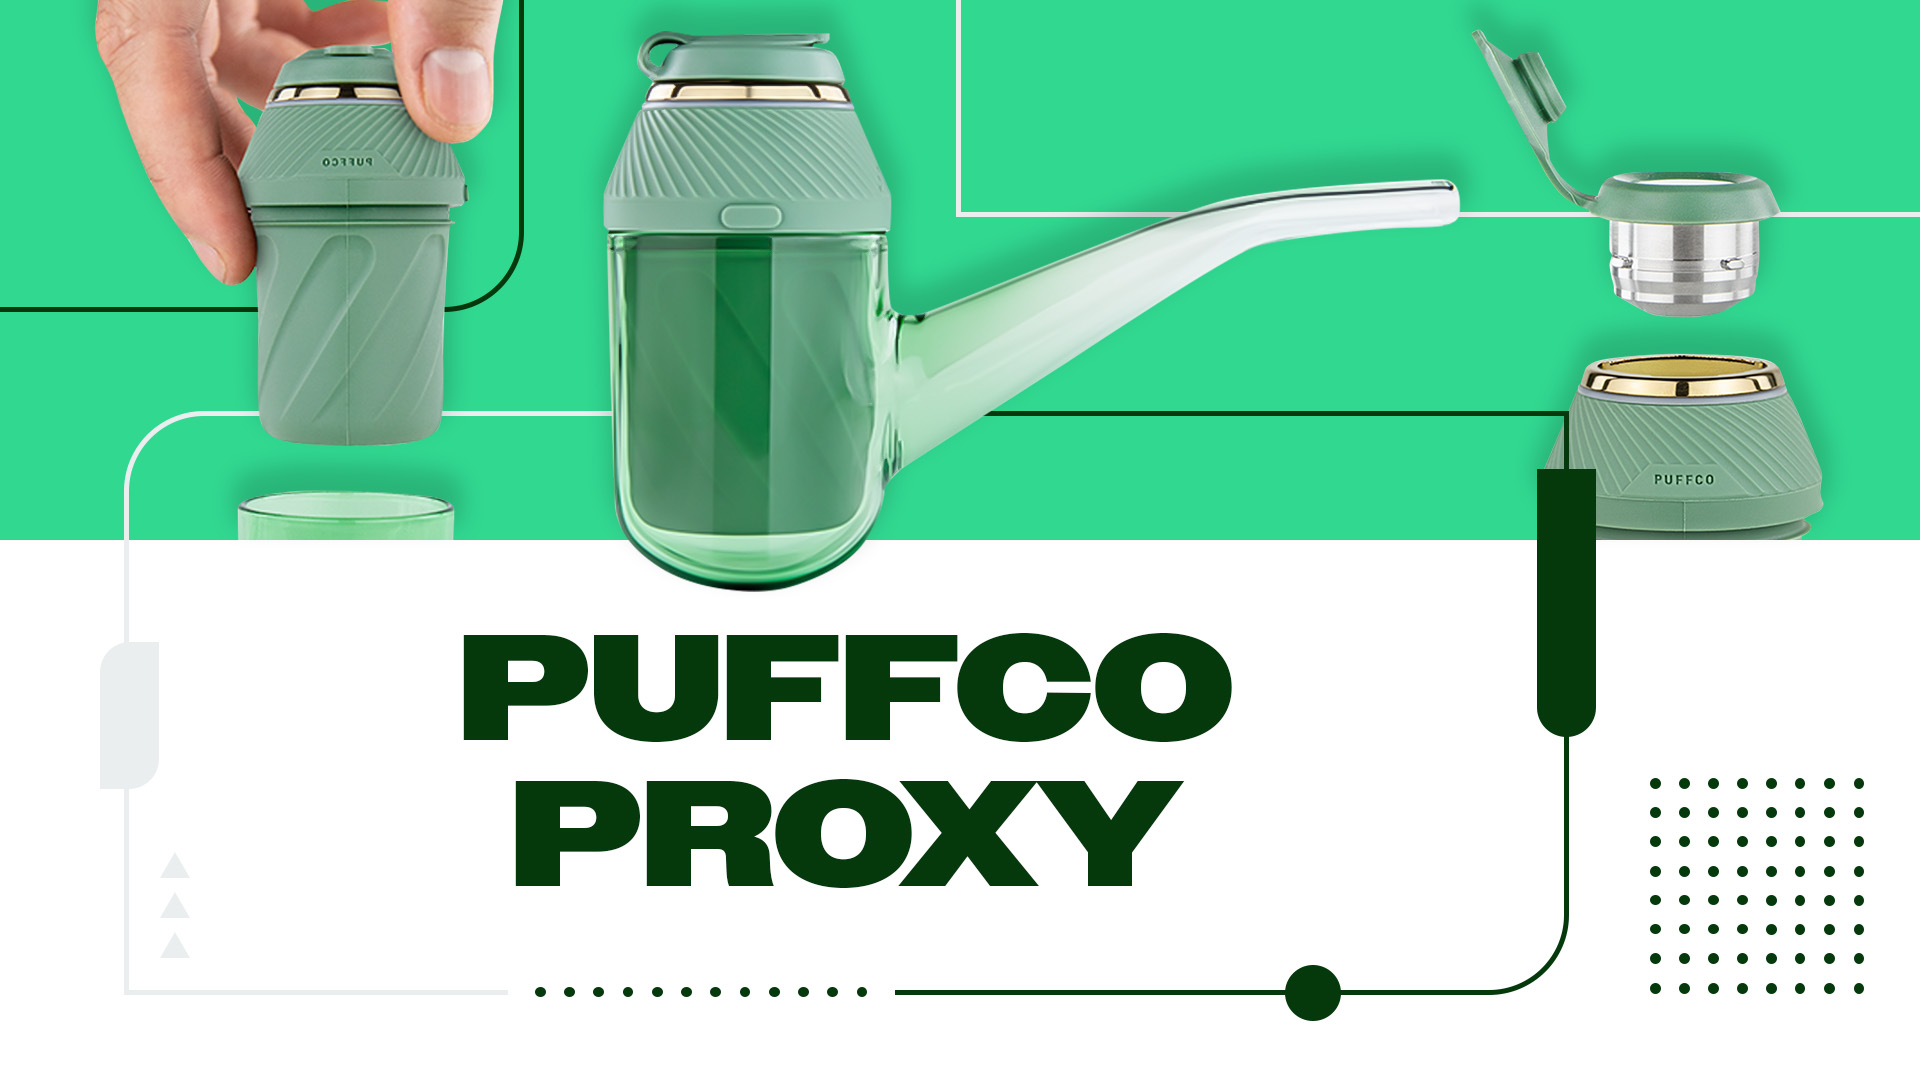 The Puffco Proxy Kit: Exploring The Latest Innovations In Cannabis Tech